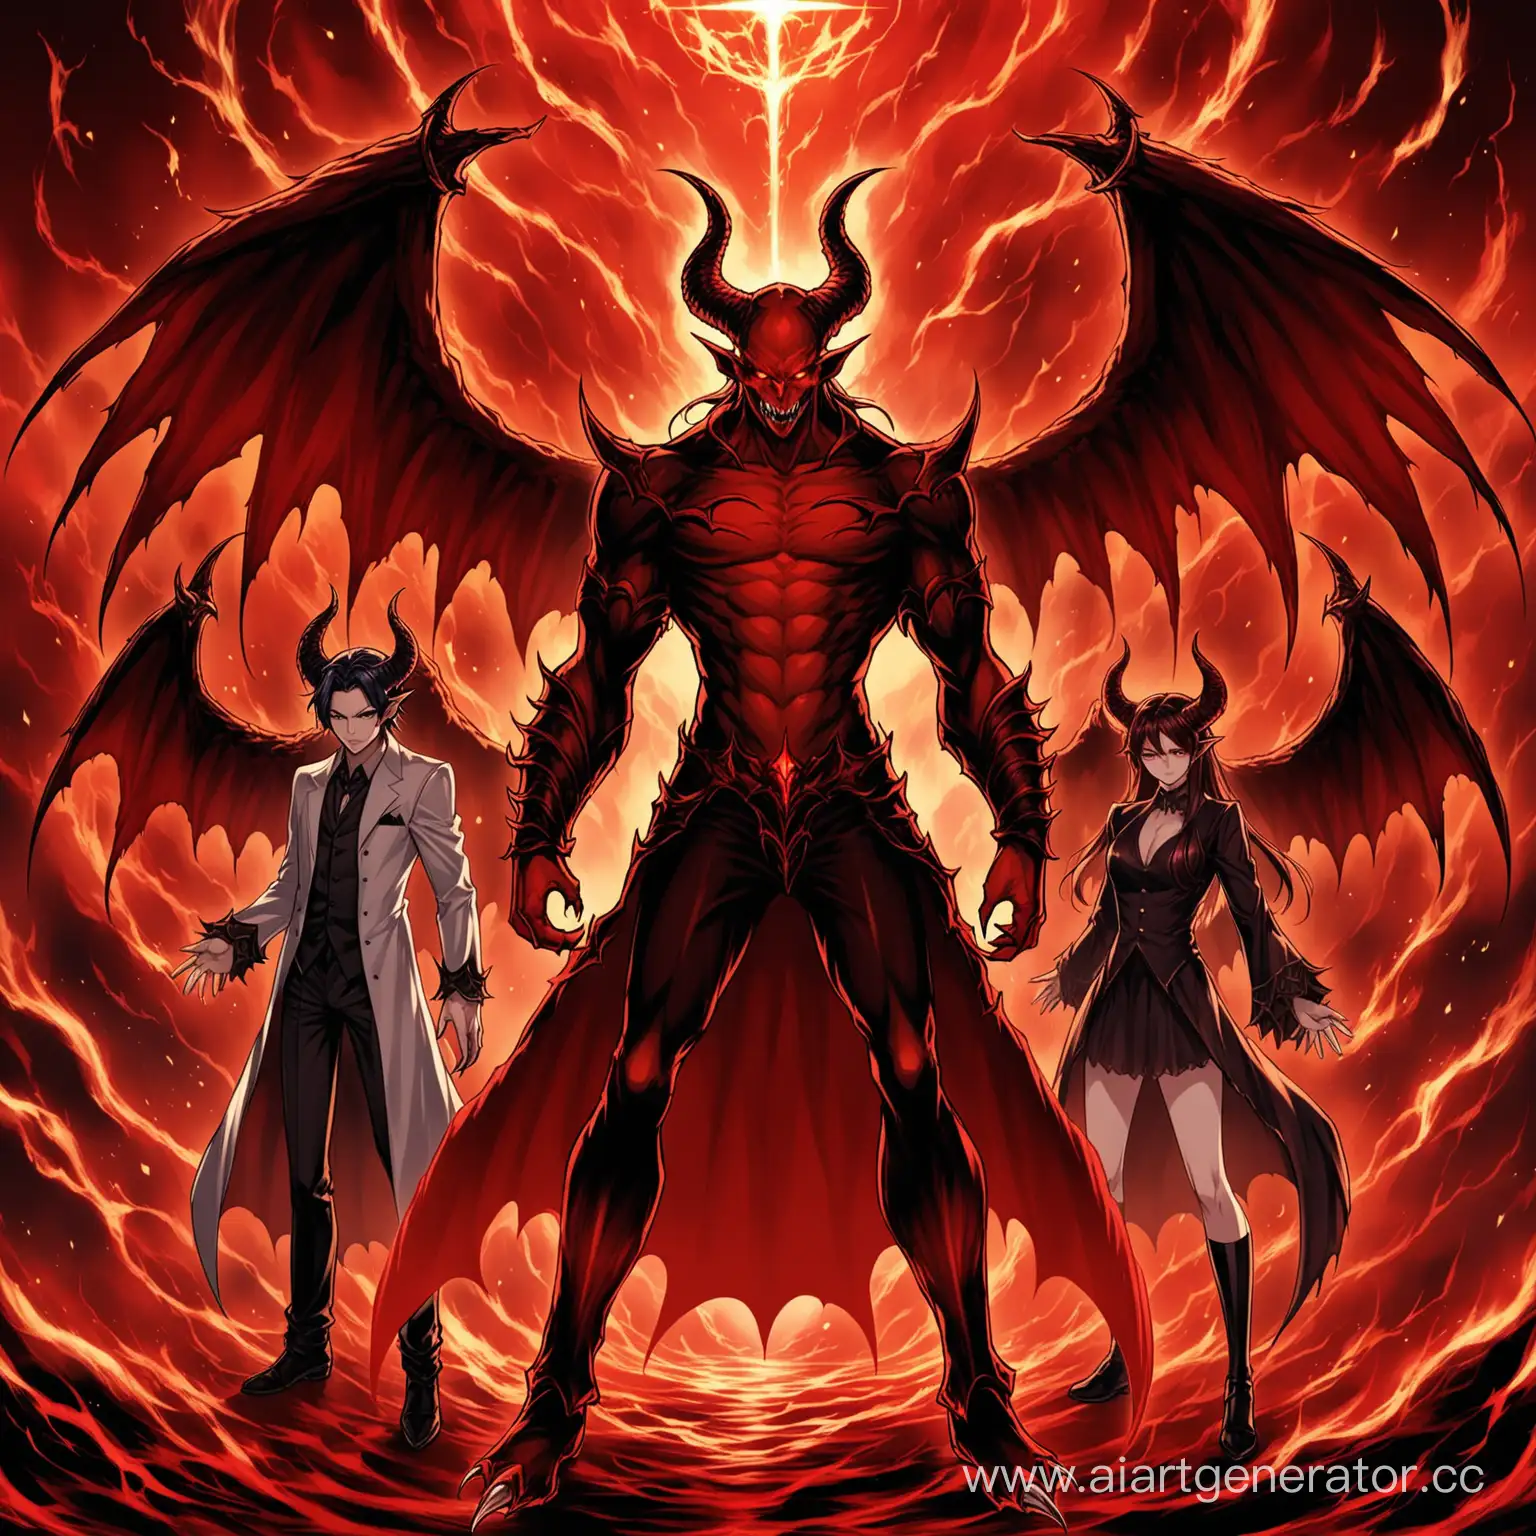 AnimeStyle-Art-of-6-Heirs-of-Hell-A-Man-with-Dual-Sets-of-Demonic-Horns-and-Angelic-Red-Wings